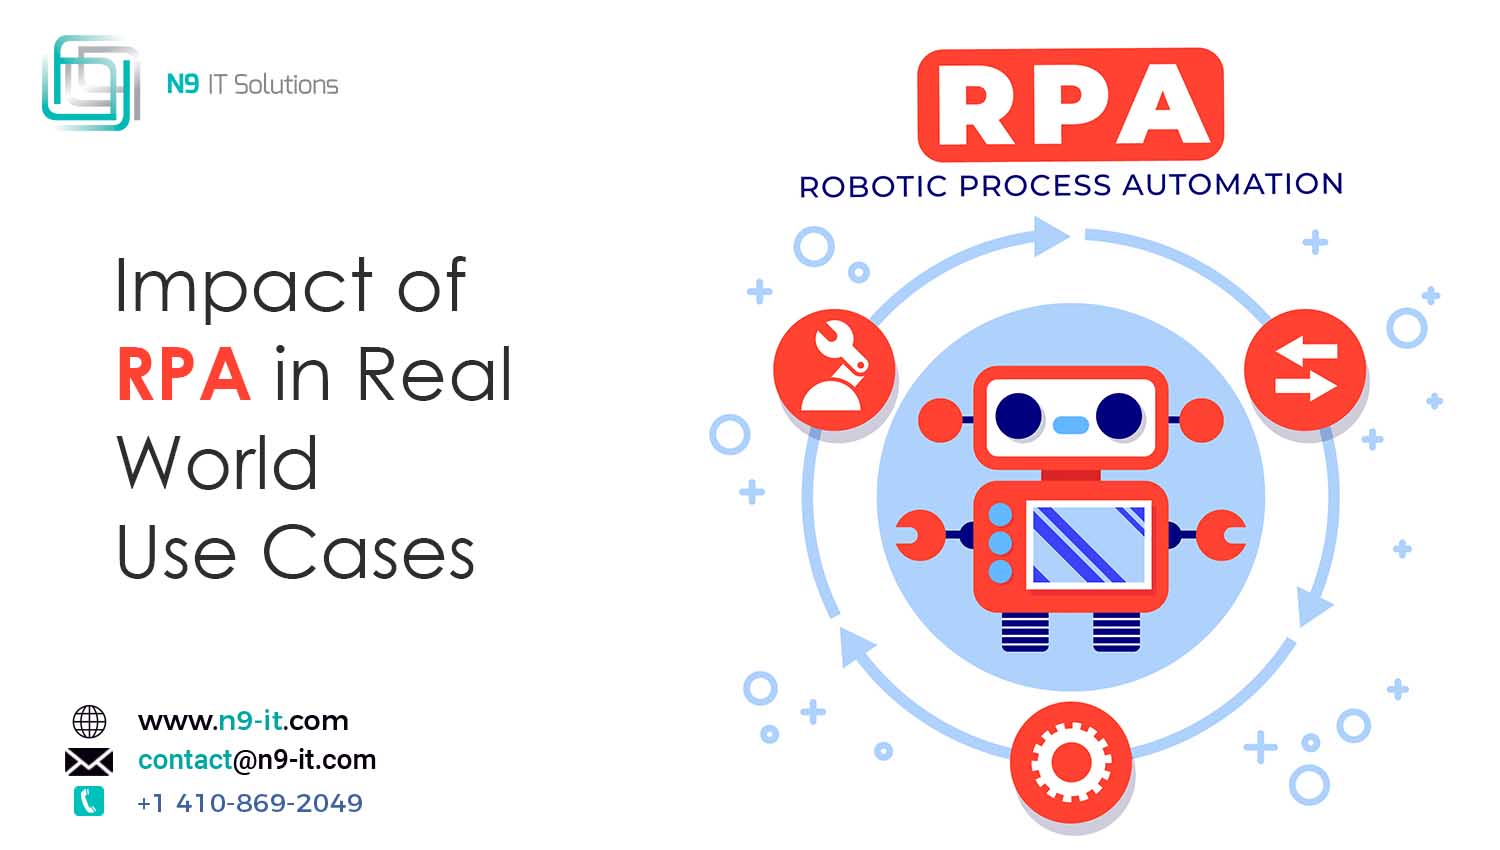 Impact of RPA in Real World Use Cases